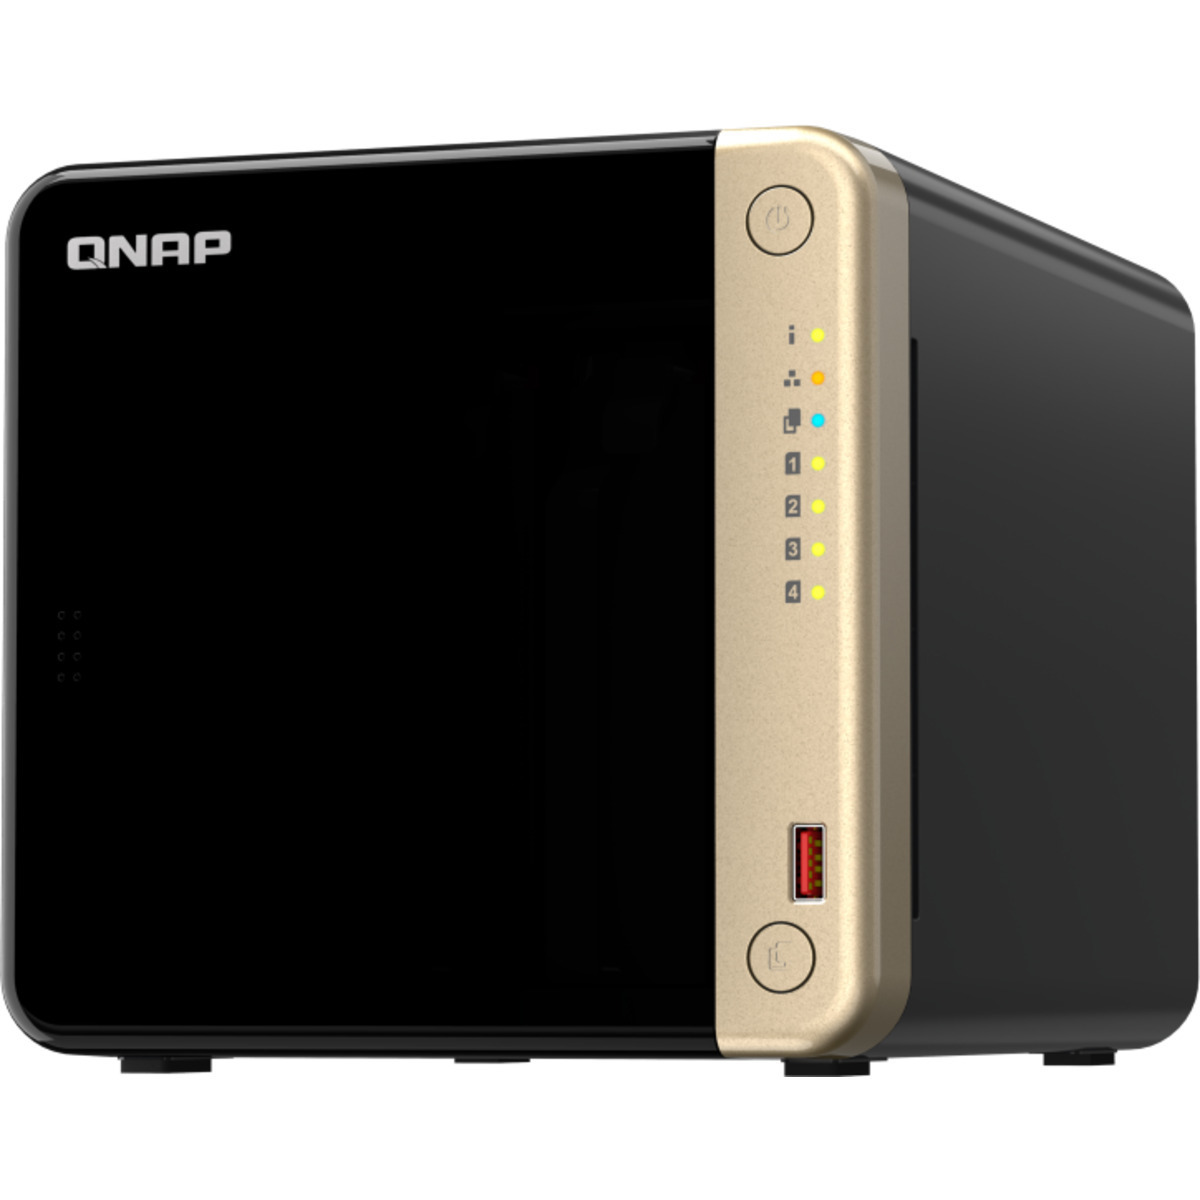 QNAP TS-464 96tb 4-Bay Desktop Multimedia / Power User / Business NAS - Network Attached Storage Device 4x24tb Western Digital Ultrastar HC580 WUH722424ALE6L4 3.5 7200rpm SATA 6Gb/s HDD ENTERPRISE Class Drives Installed - Burn-In Tested TS-464